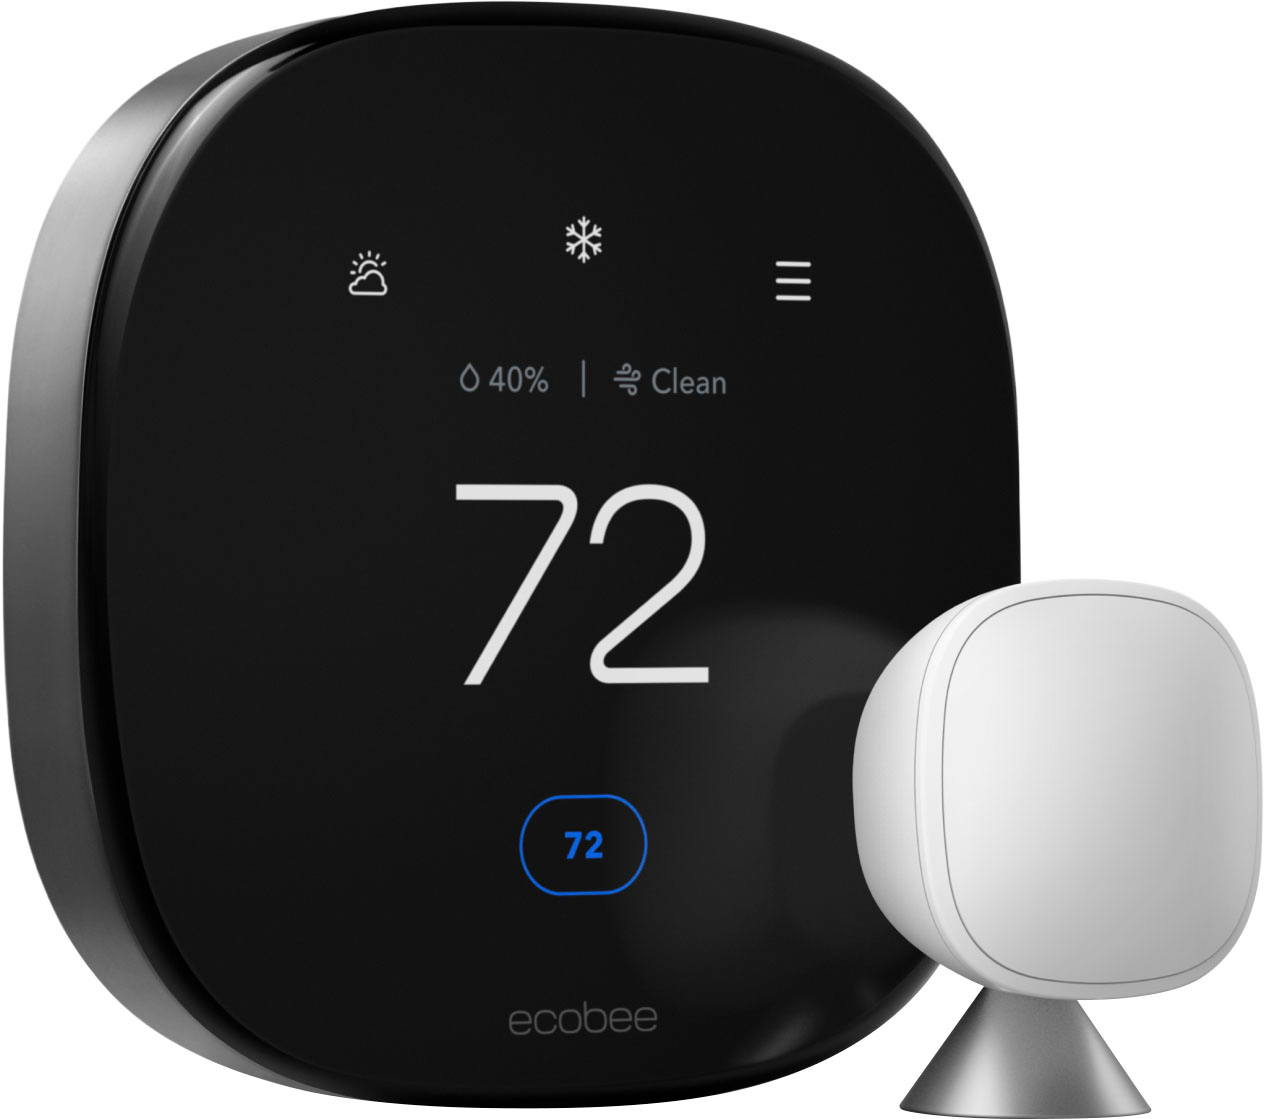 How Do I Get My Smart Thermostat Rebate